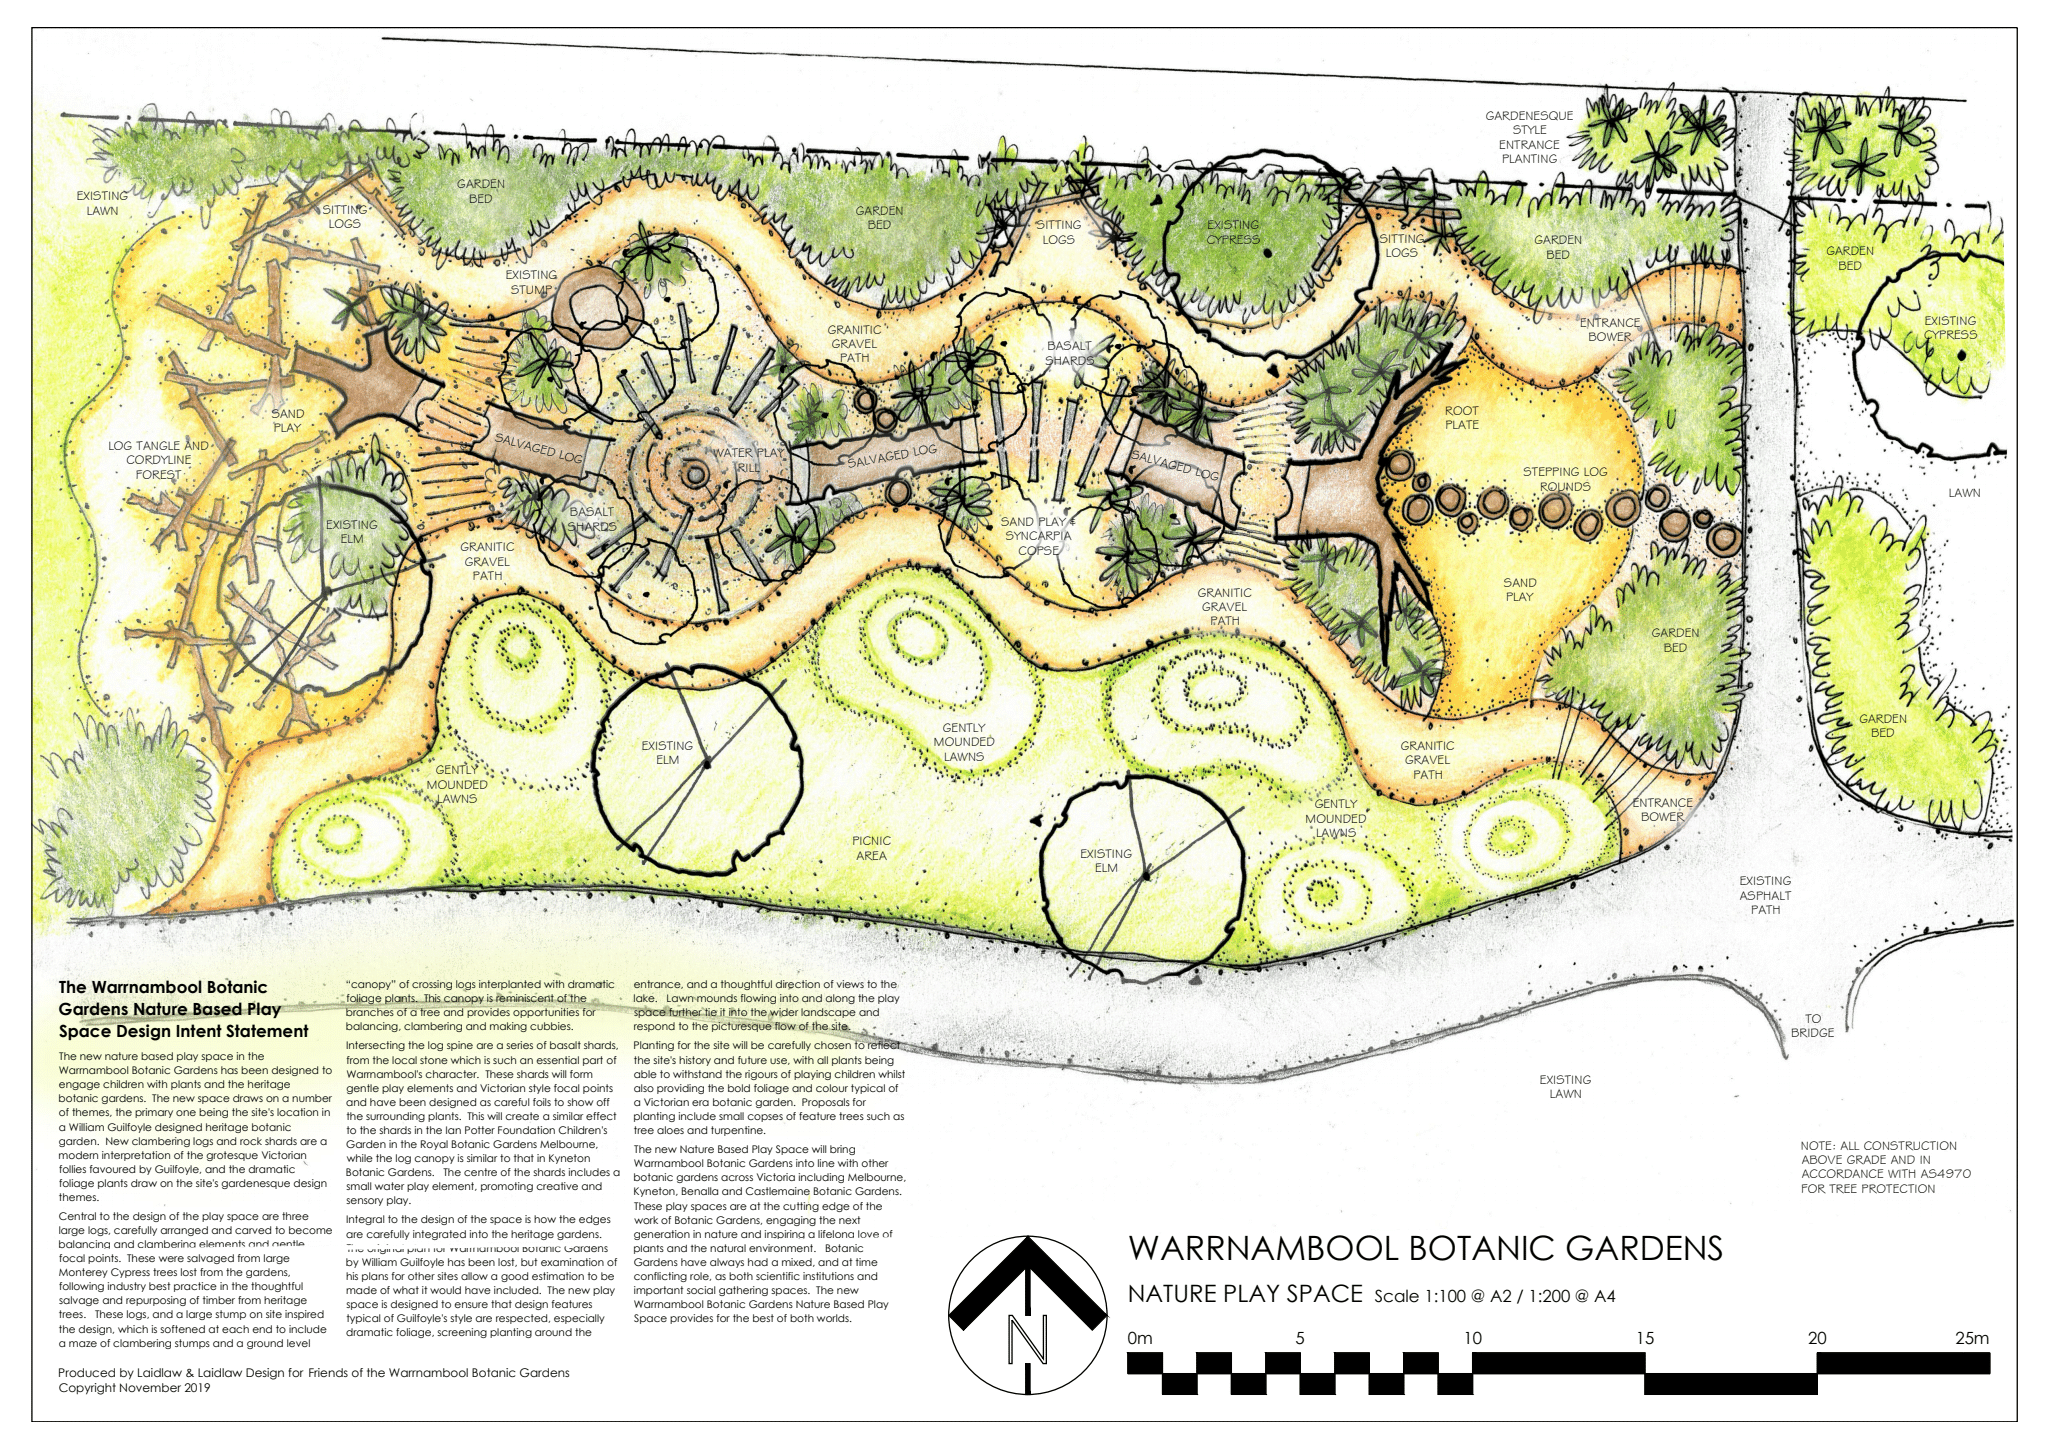 Nature play space design